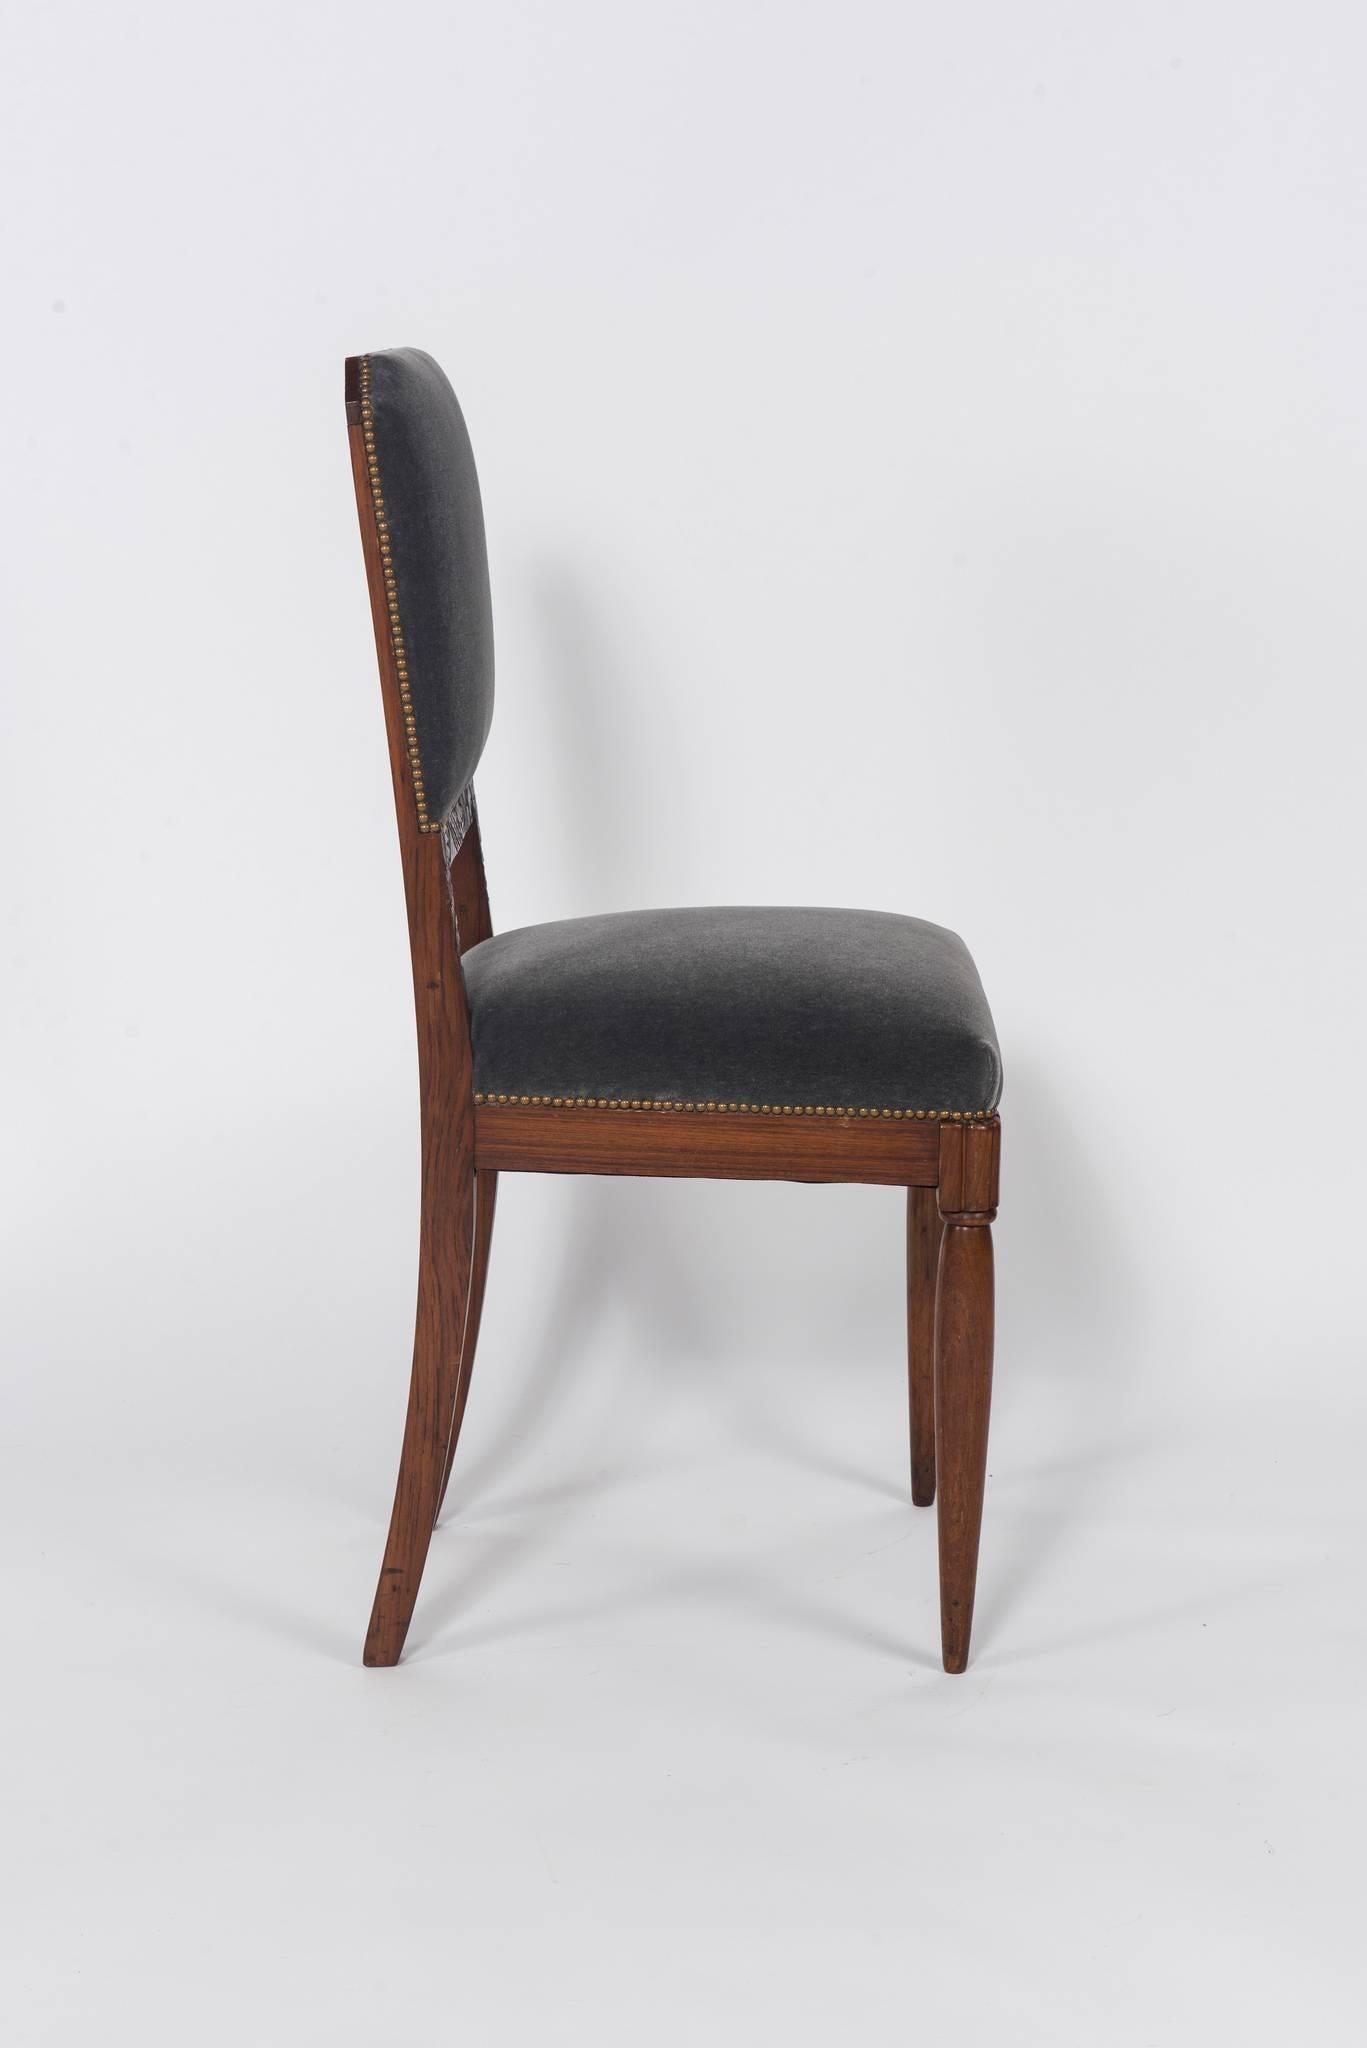 Mohair Carved Rosewood Art Deco Side Chair in the Style of Paul Follot